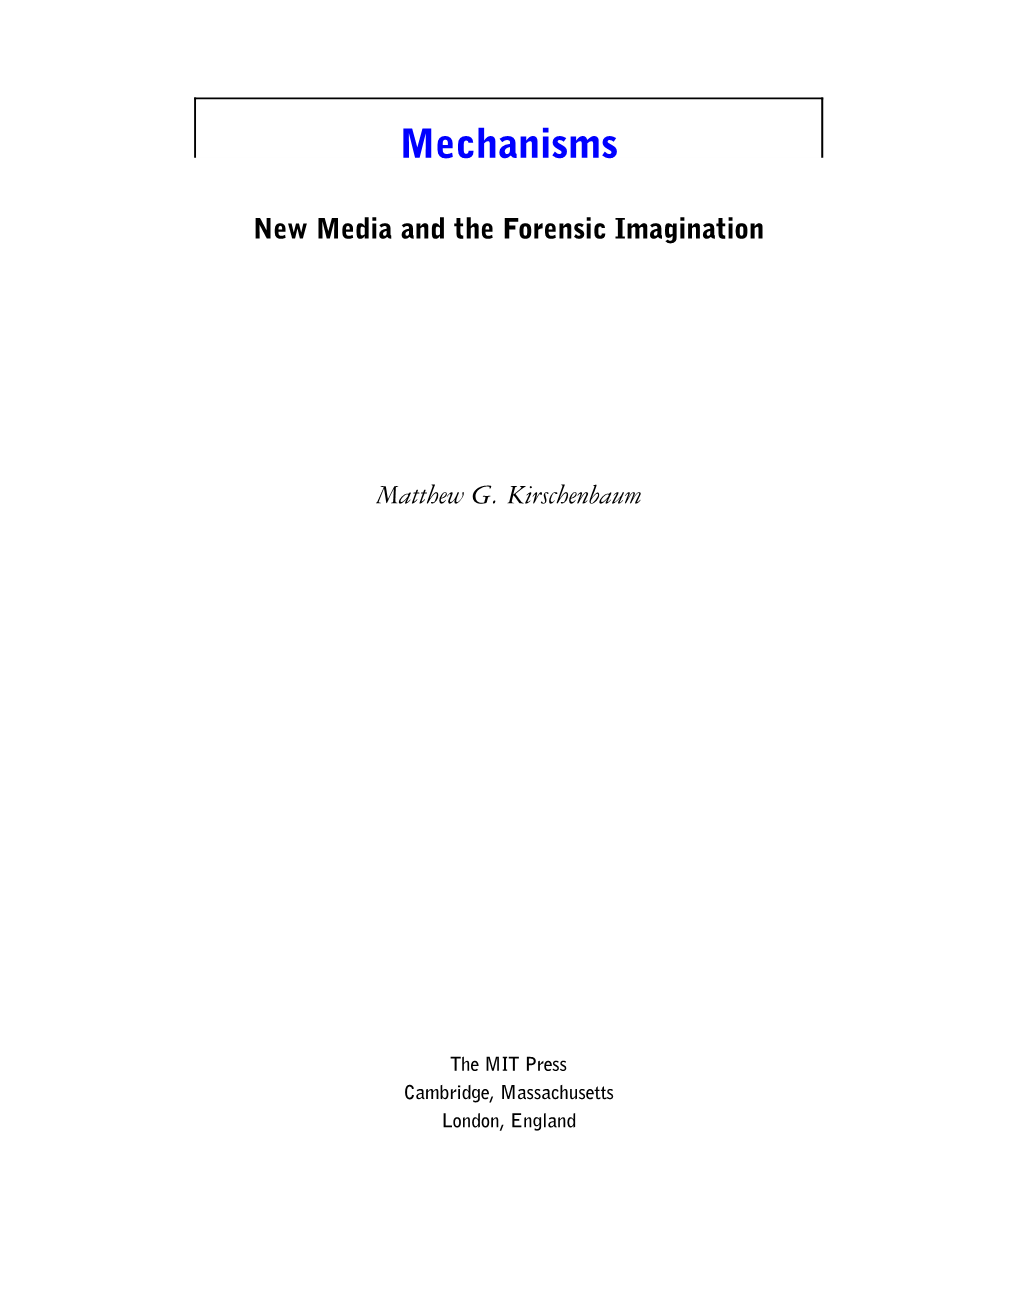 Mechanisms: New Media and the Forensic Imagination (Introduction)